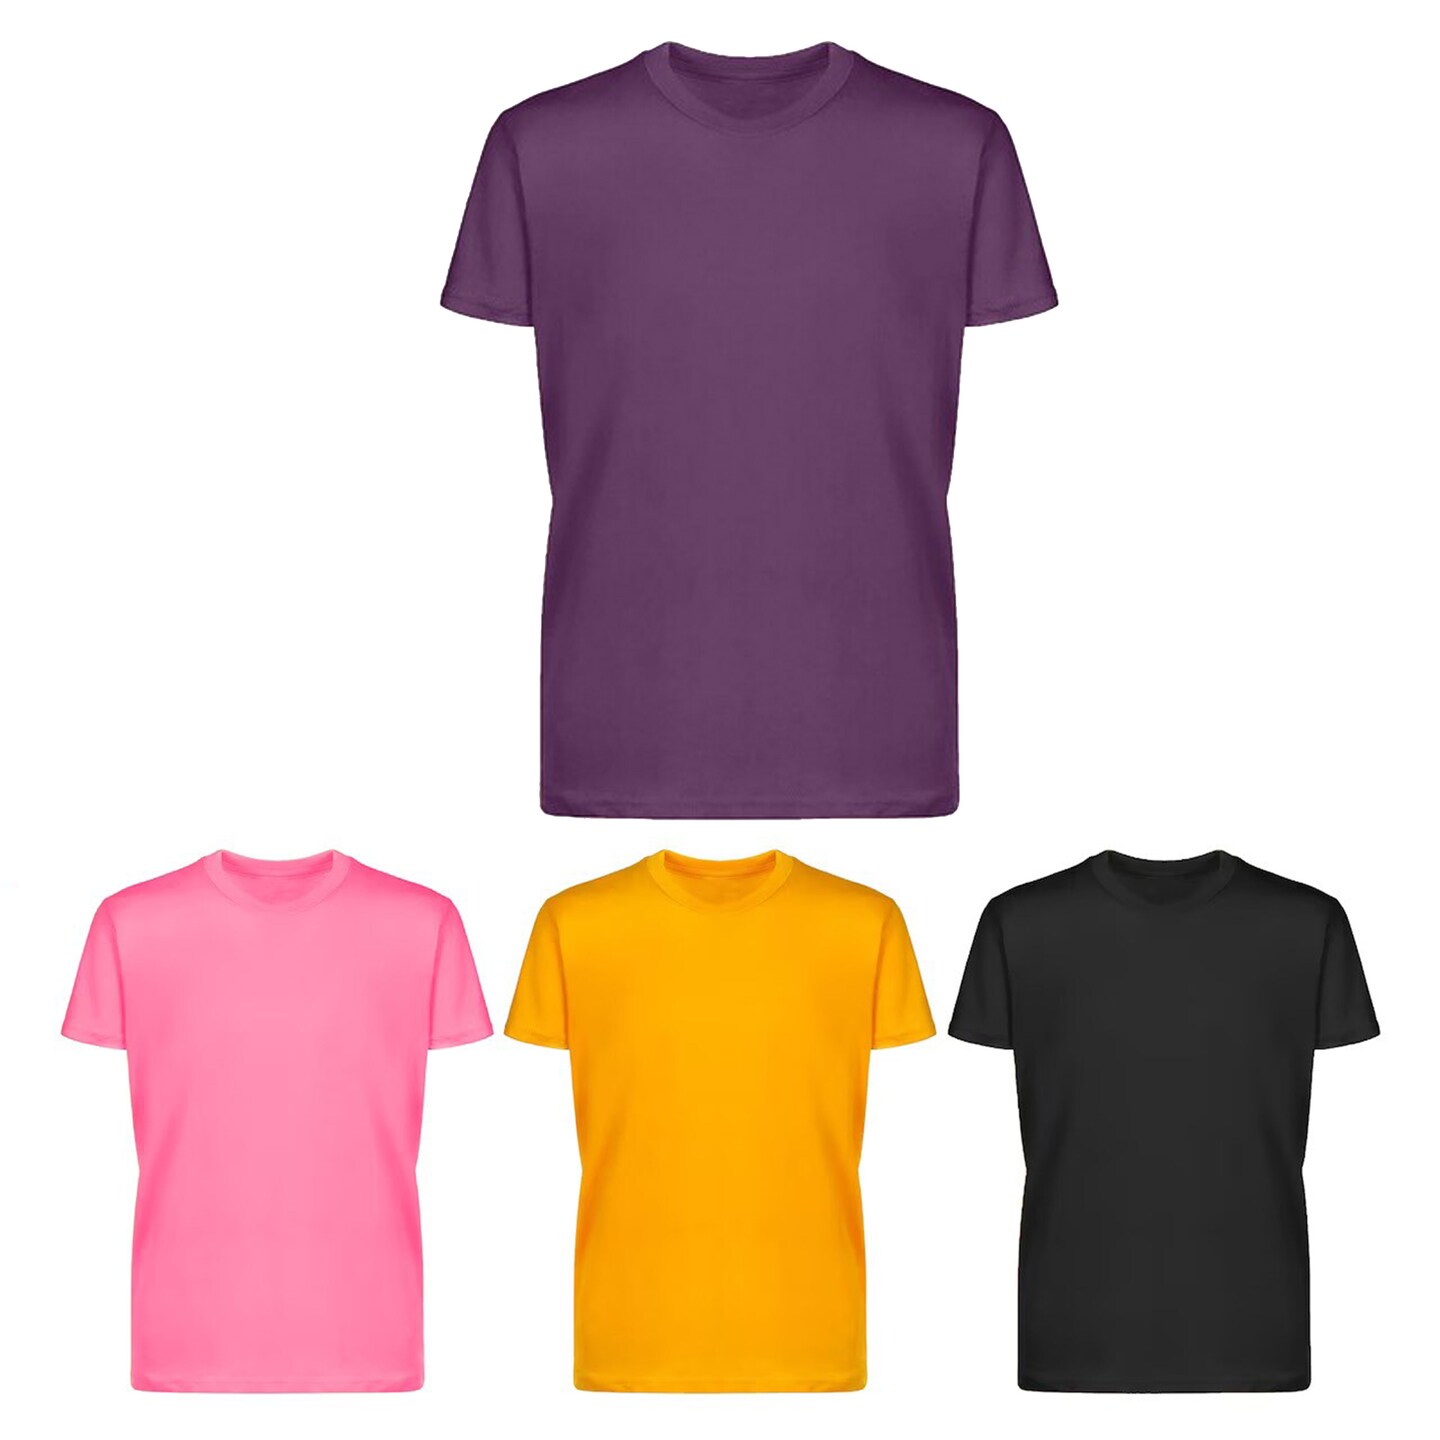 Kids Pack size T-shirts - 100% Cotton Short Sleeve T-shirts, Cool and  Cute T-shirts for Fashion-Forward Kids - Summer Tees, RADYAN